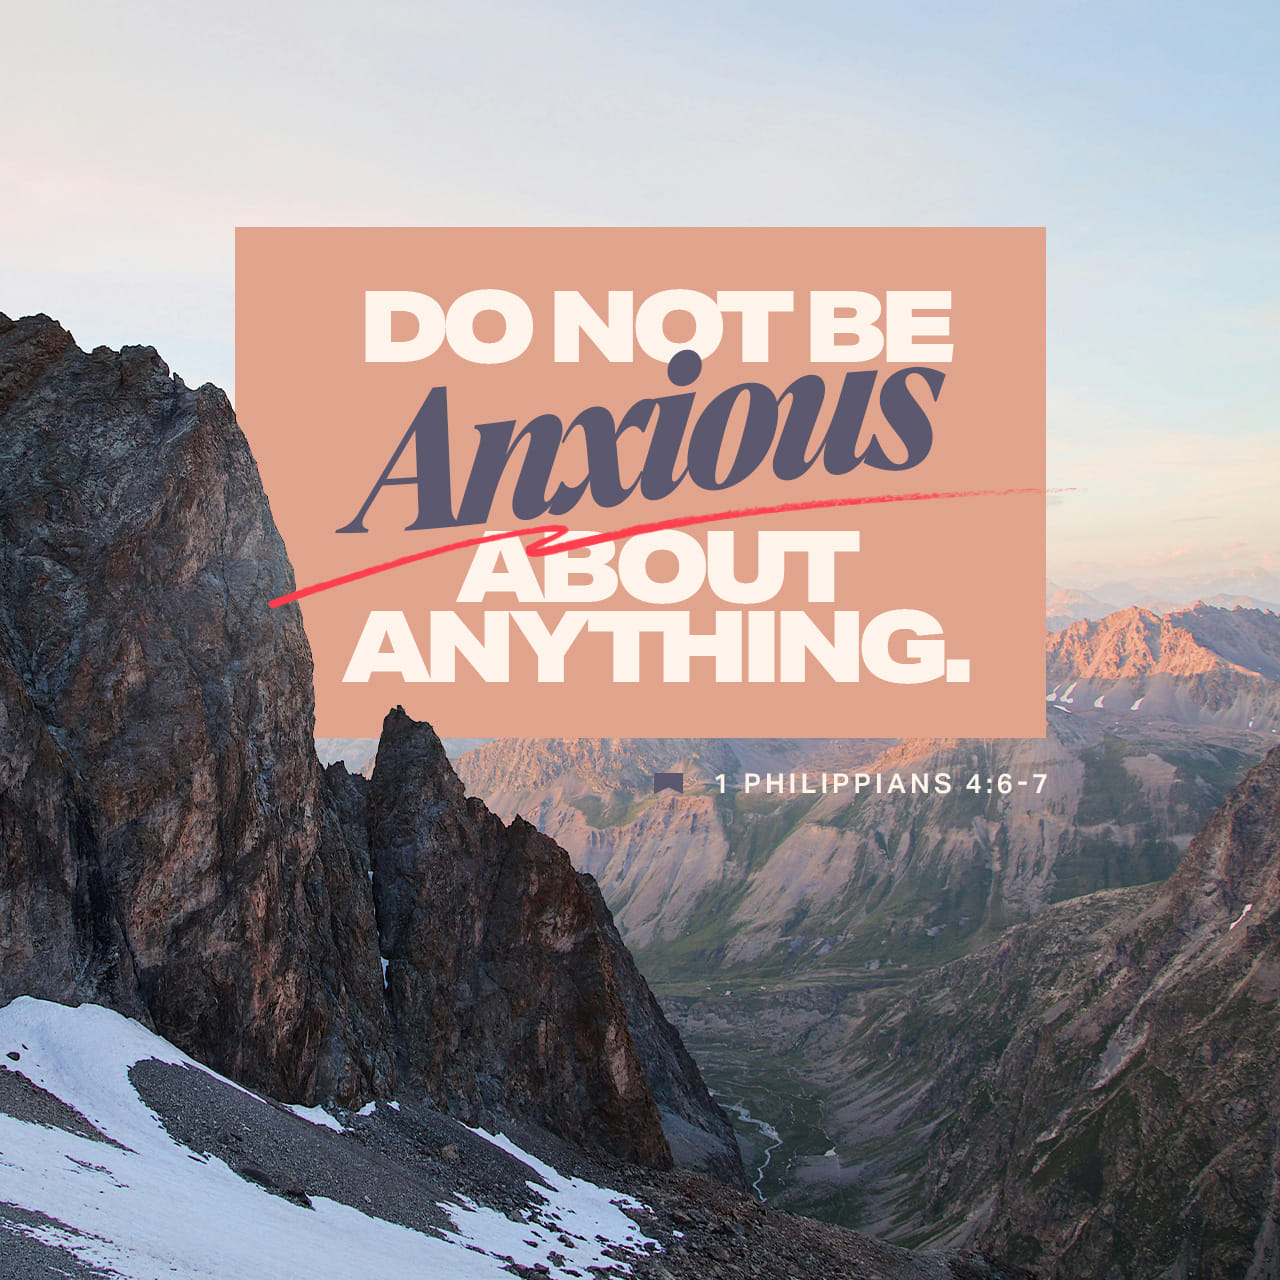 Philippians 4:6-8 Do not be anxious about anything, but in every situation,  by prayer and petition, with thanksgiving, present your requests to God.  And the peace of God, which transcends all understanding